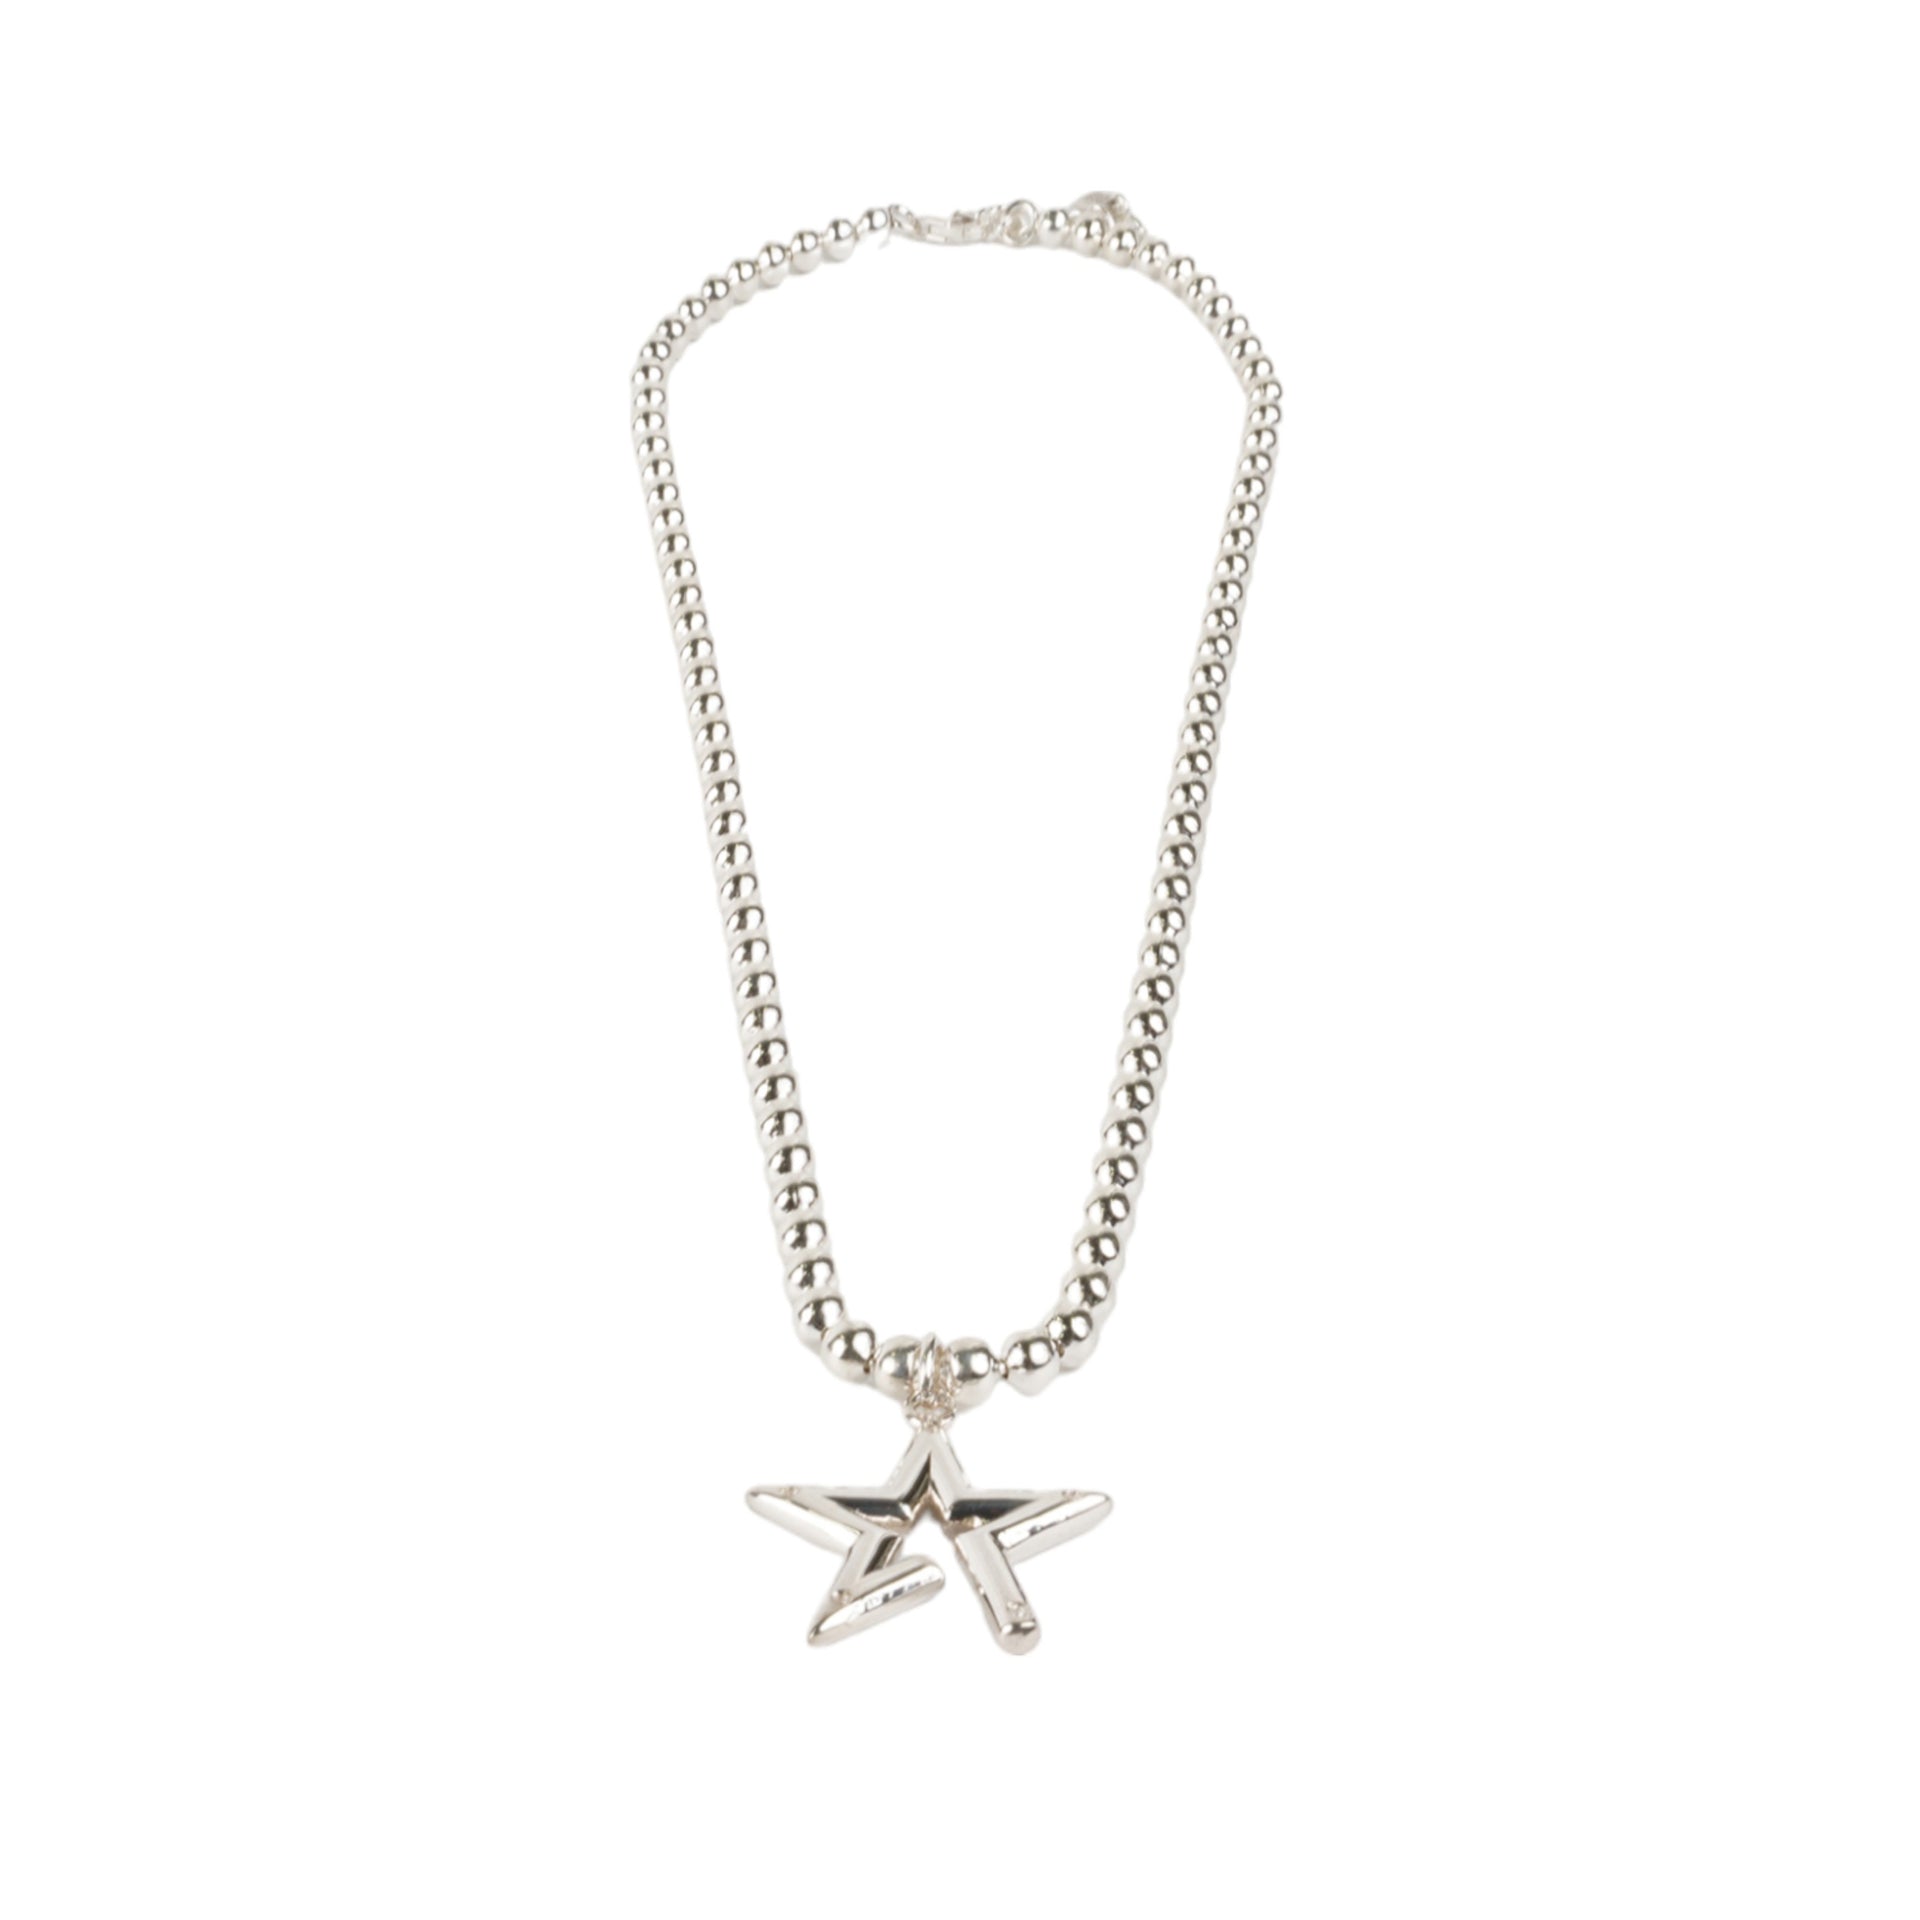 BOLD STAR NECKLACE / SILVER